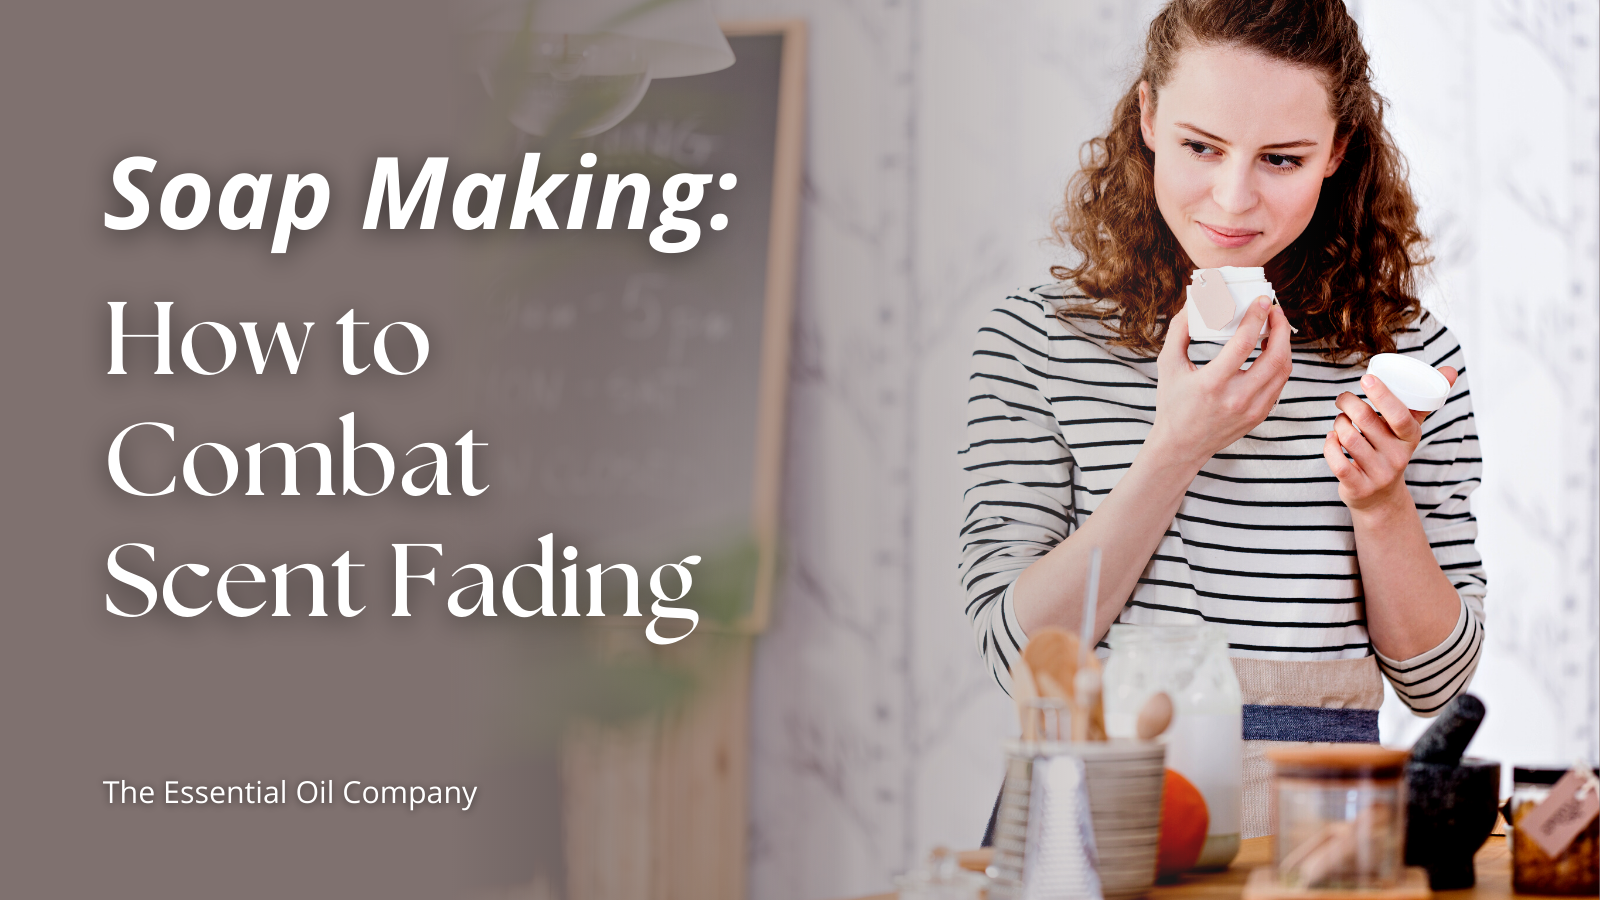 Soap Making: How to Combat Scent Fading